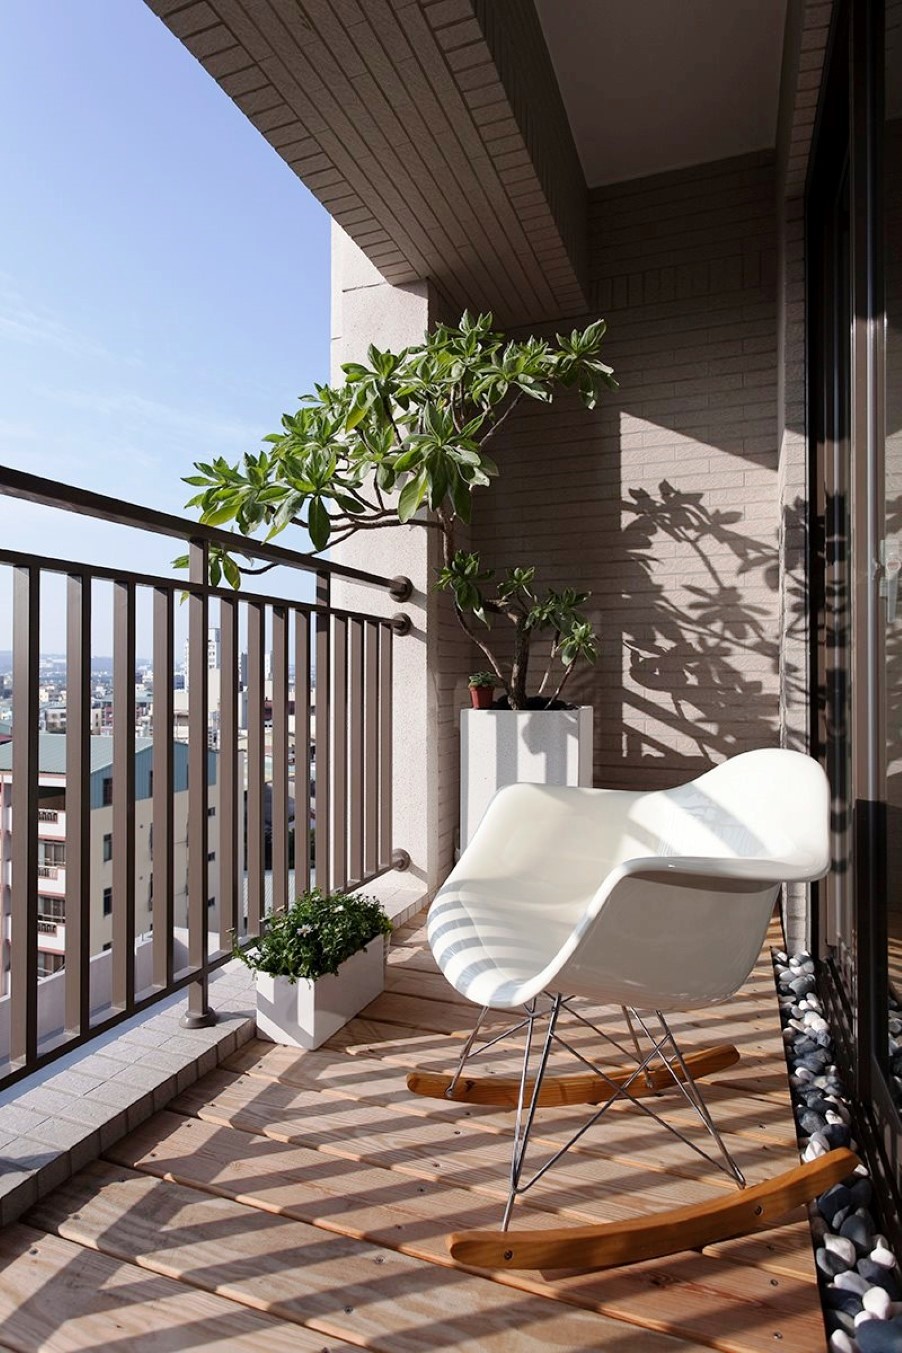 Balcony Decor Designs And Ideas To Try